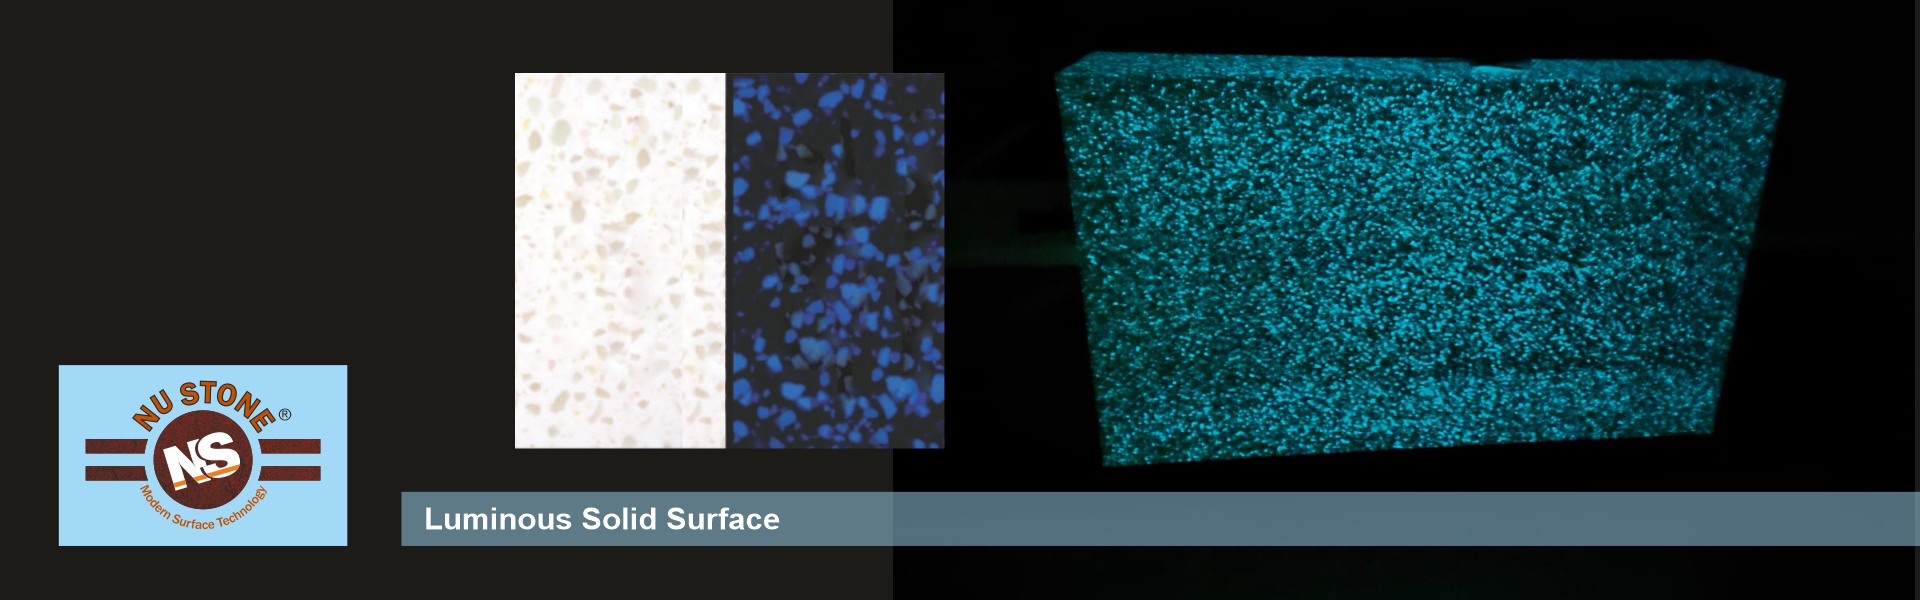 Luminous Solid Surface